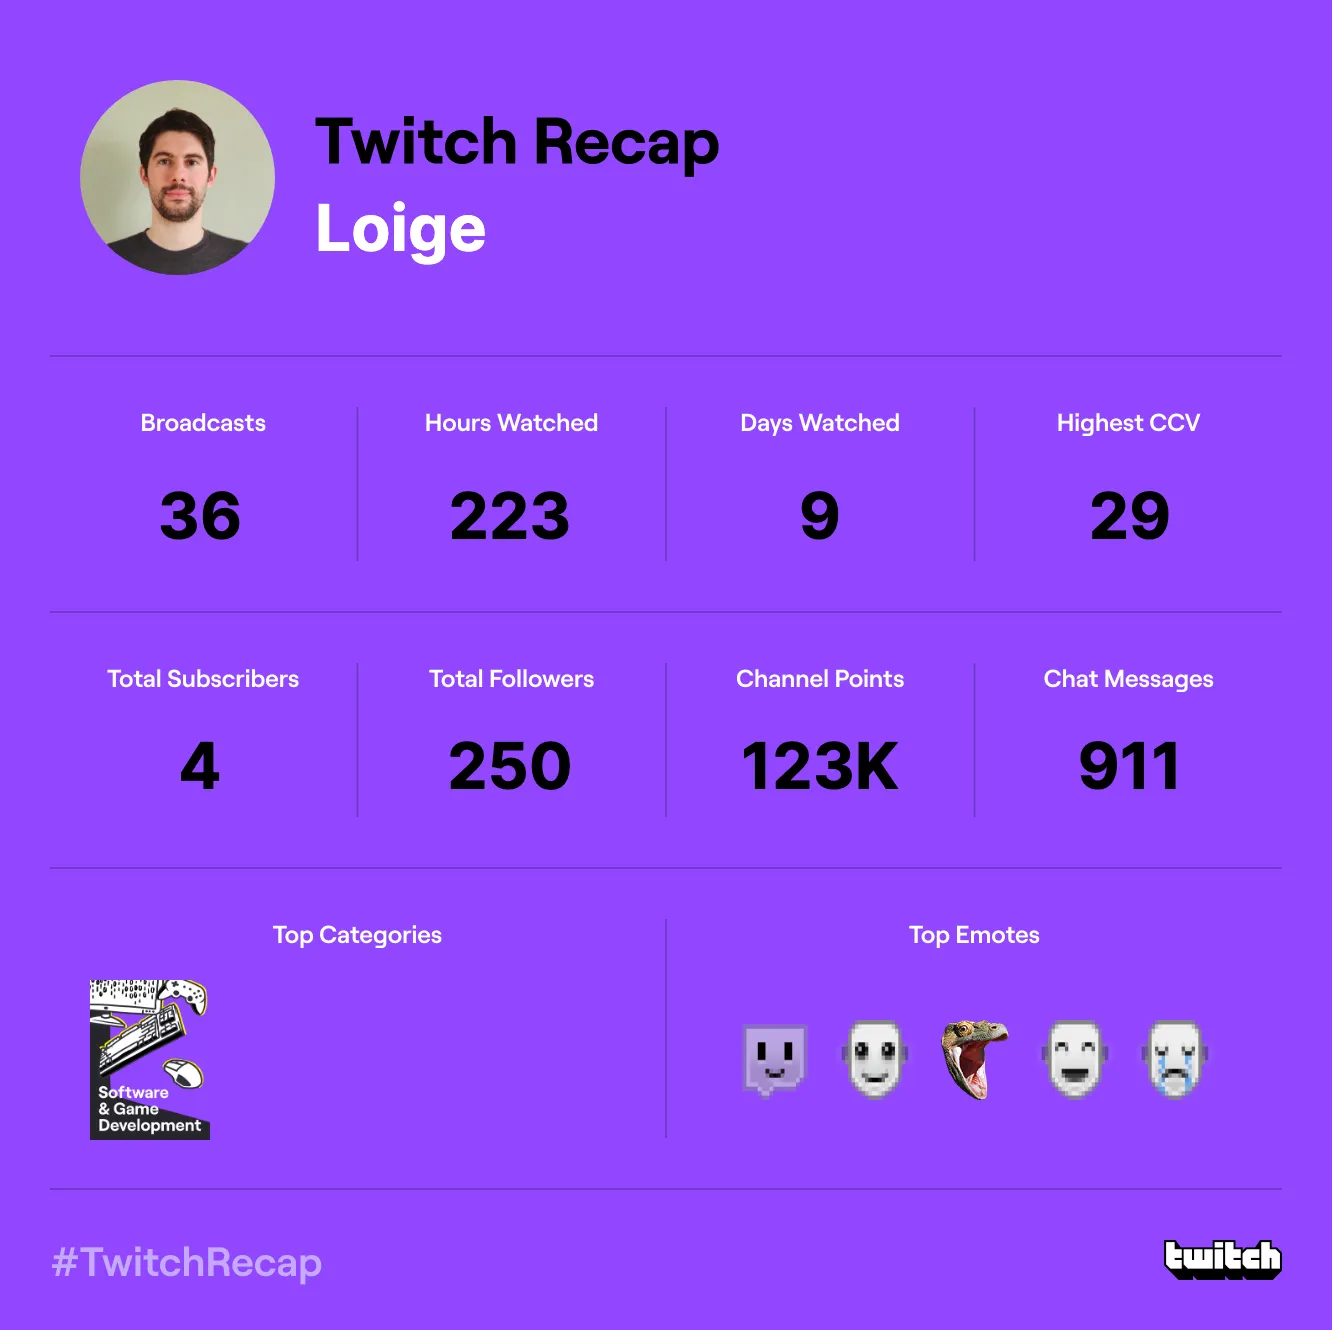 Twitch yearly recap 2022 for loige